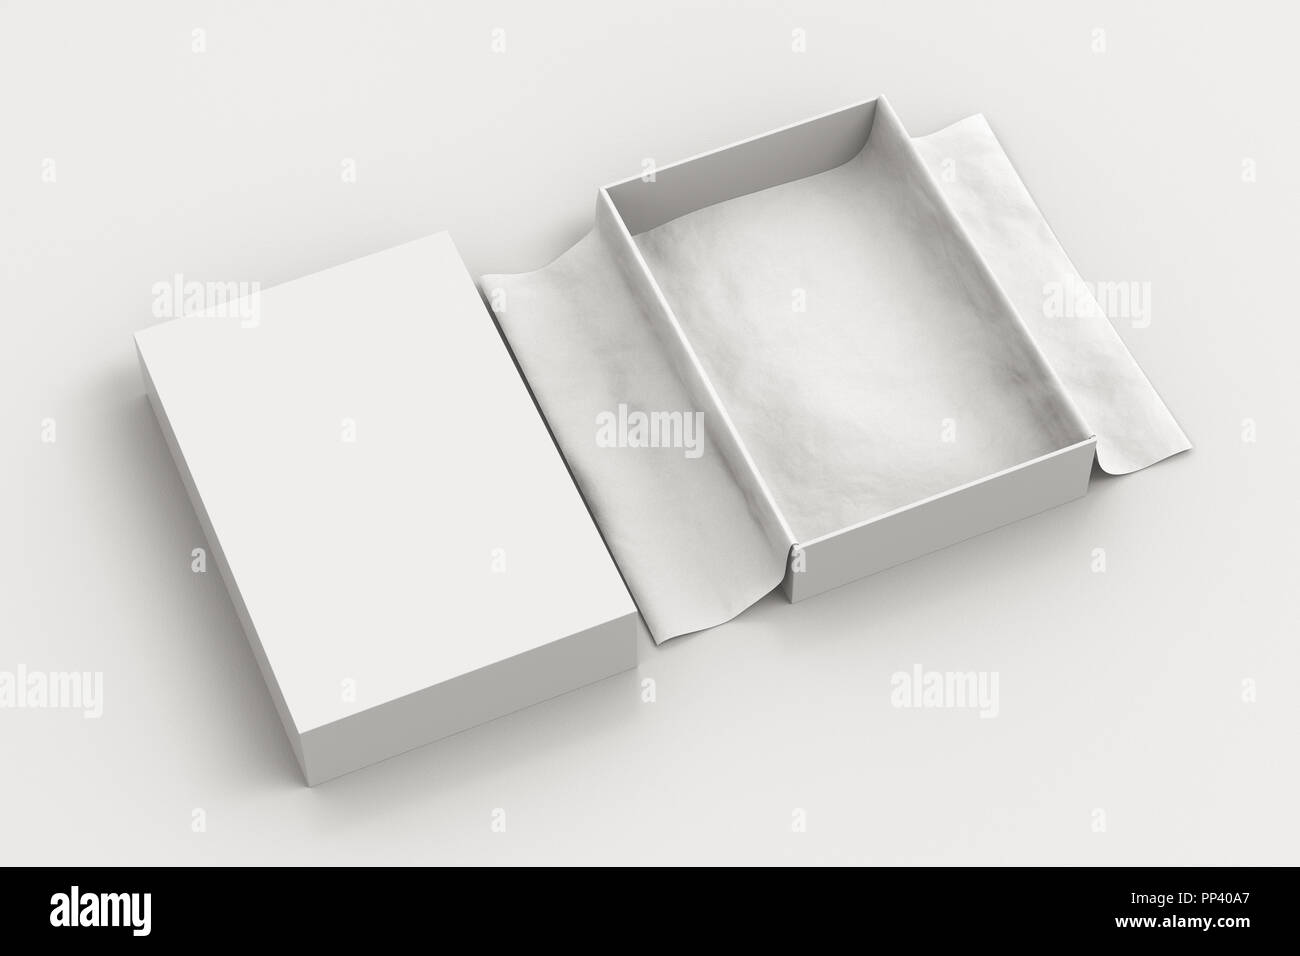 Download White open gift box mockup on white background with ...